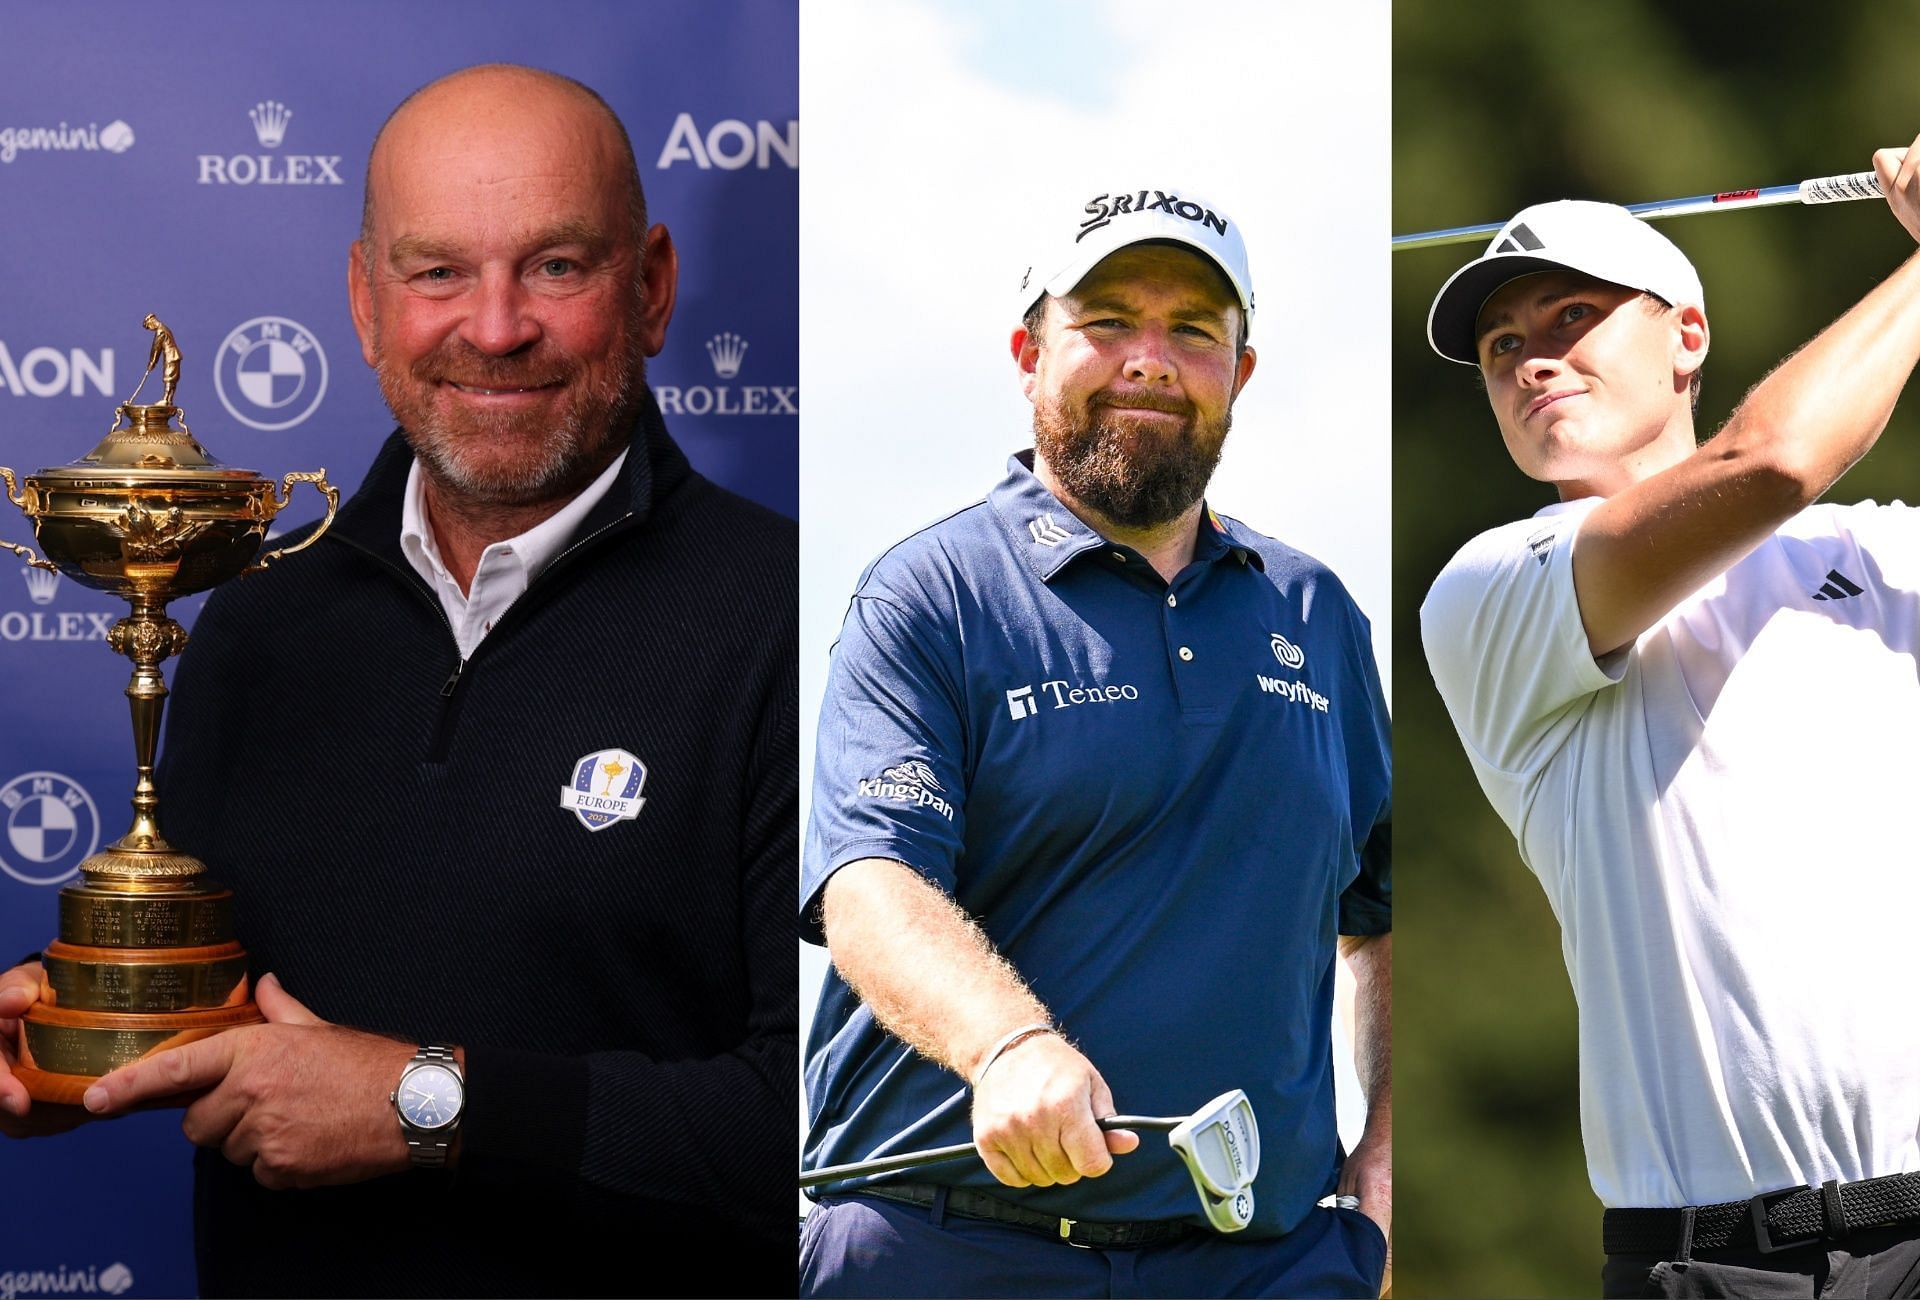 Thomas Bjorn Shane Lowry and Ludvig Aberg&rsquo;s Ryder Cup pick